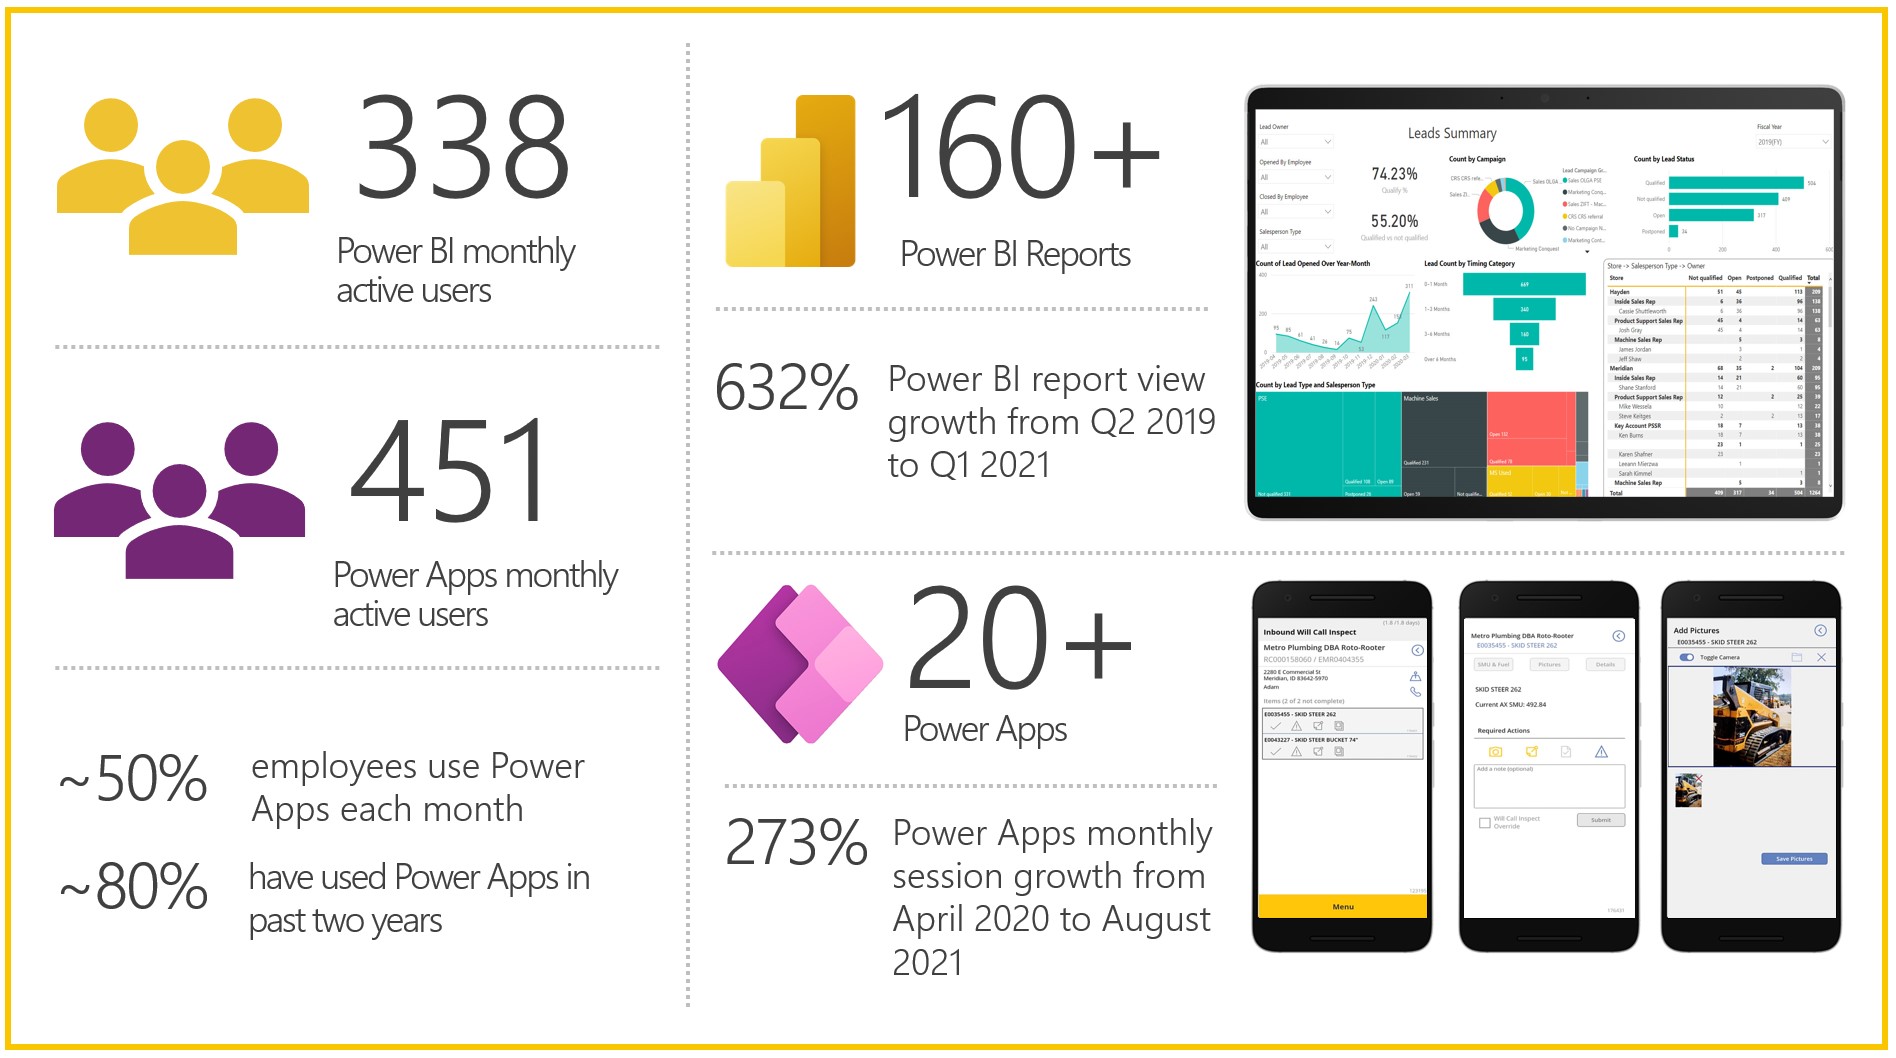 Infographic with impact stats - 338 Power BI monthly active users, 451 Power Apps monthly active users, 160+ Power BI reports, 632% Power BI growth, 20+ Power Apps, 273% Power Apps growth